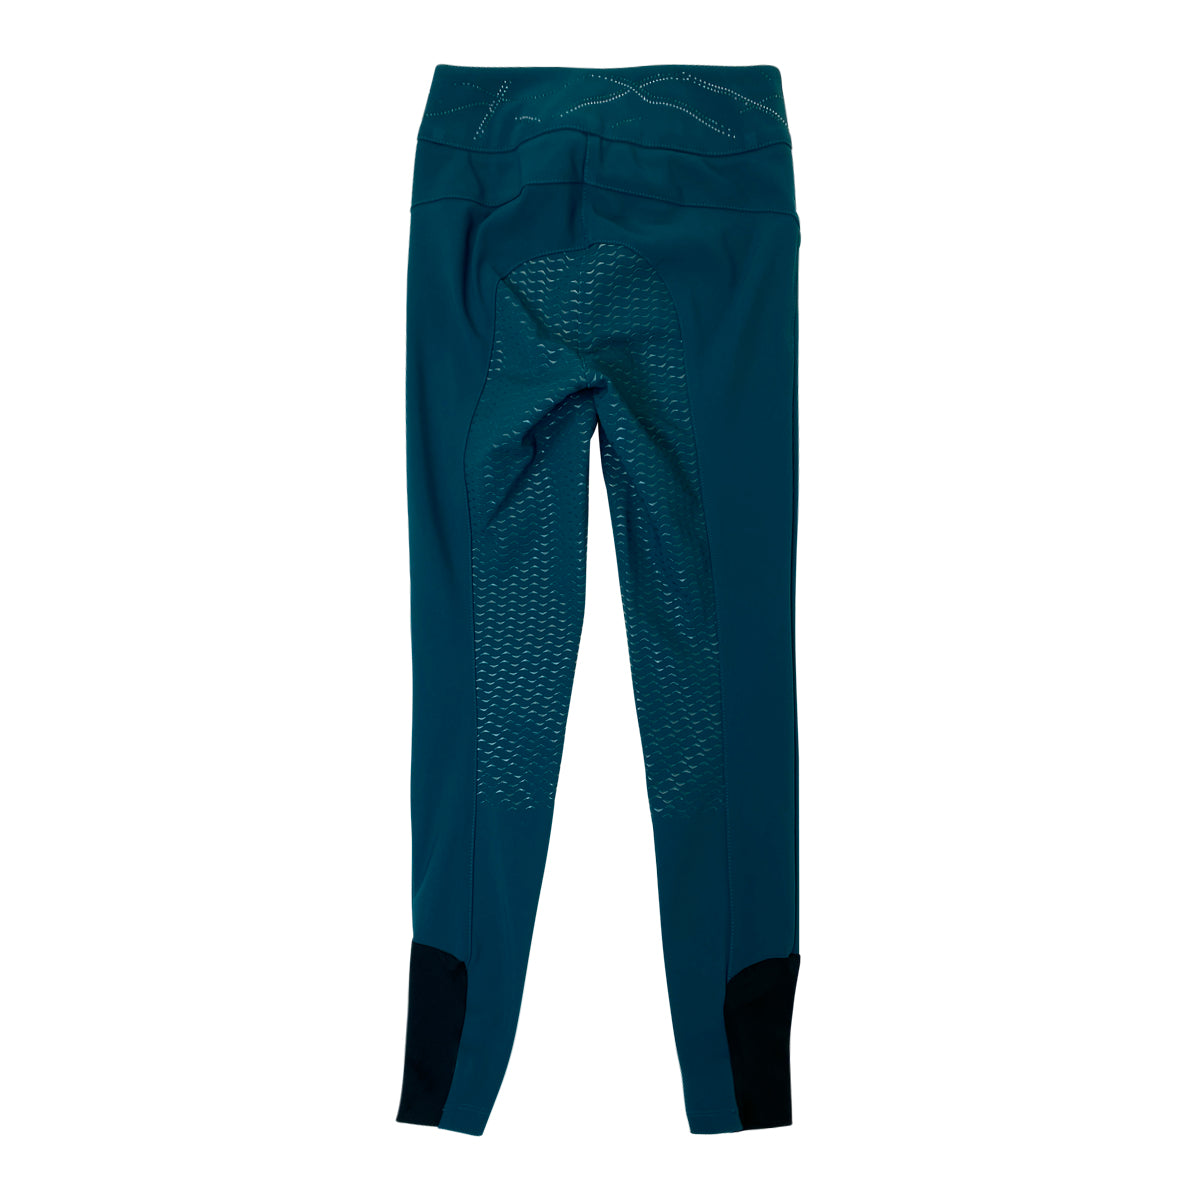 Animo 'Nacess' Full Grip Breeches in Deep Teal